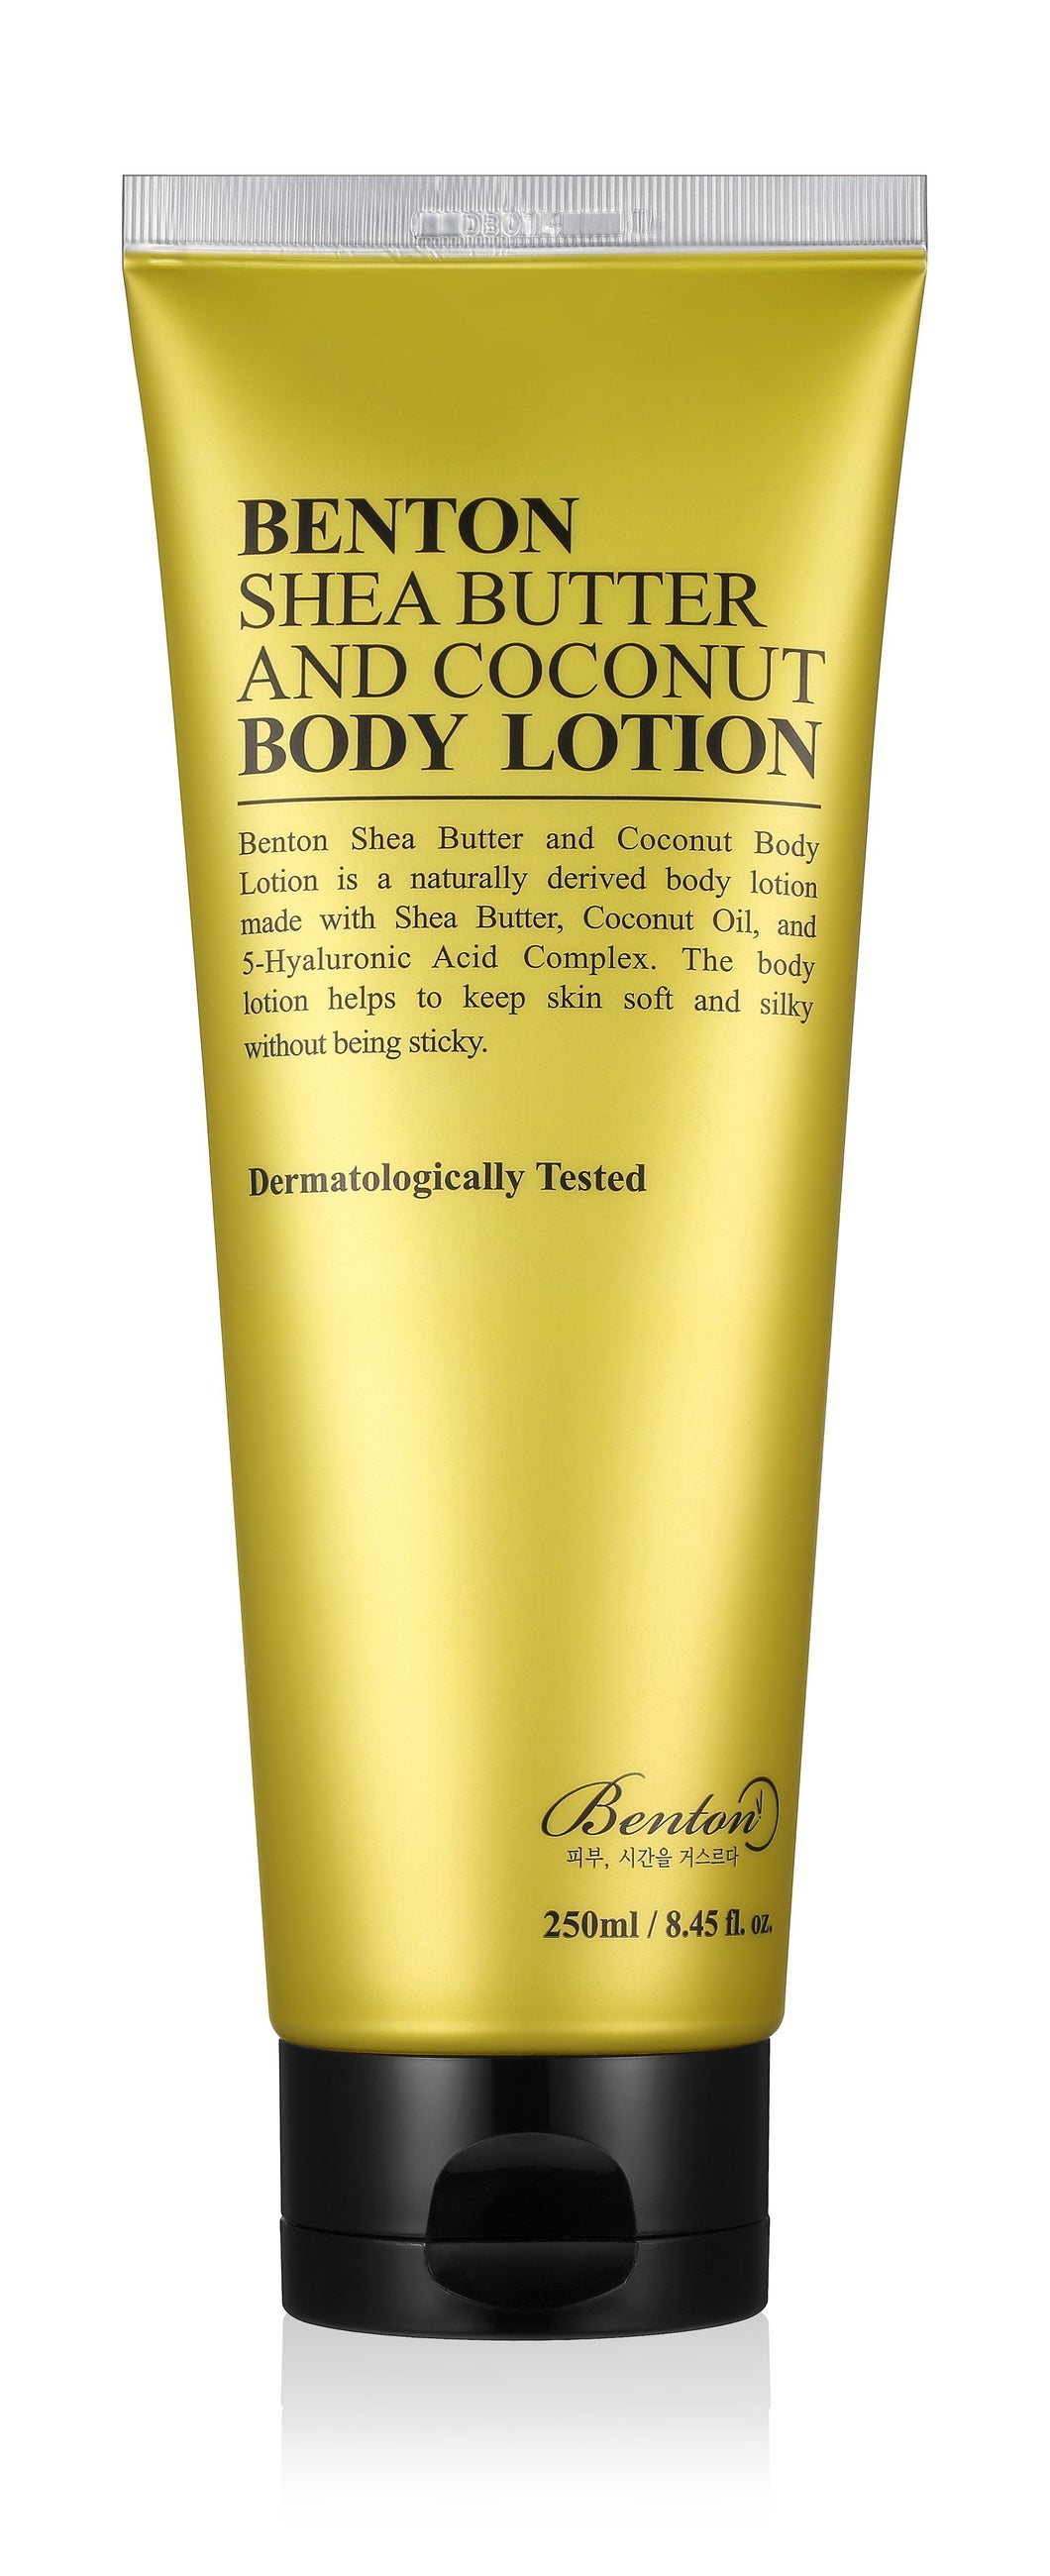 Benton Shea Butter And Coconut Body Lotion 250ml